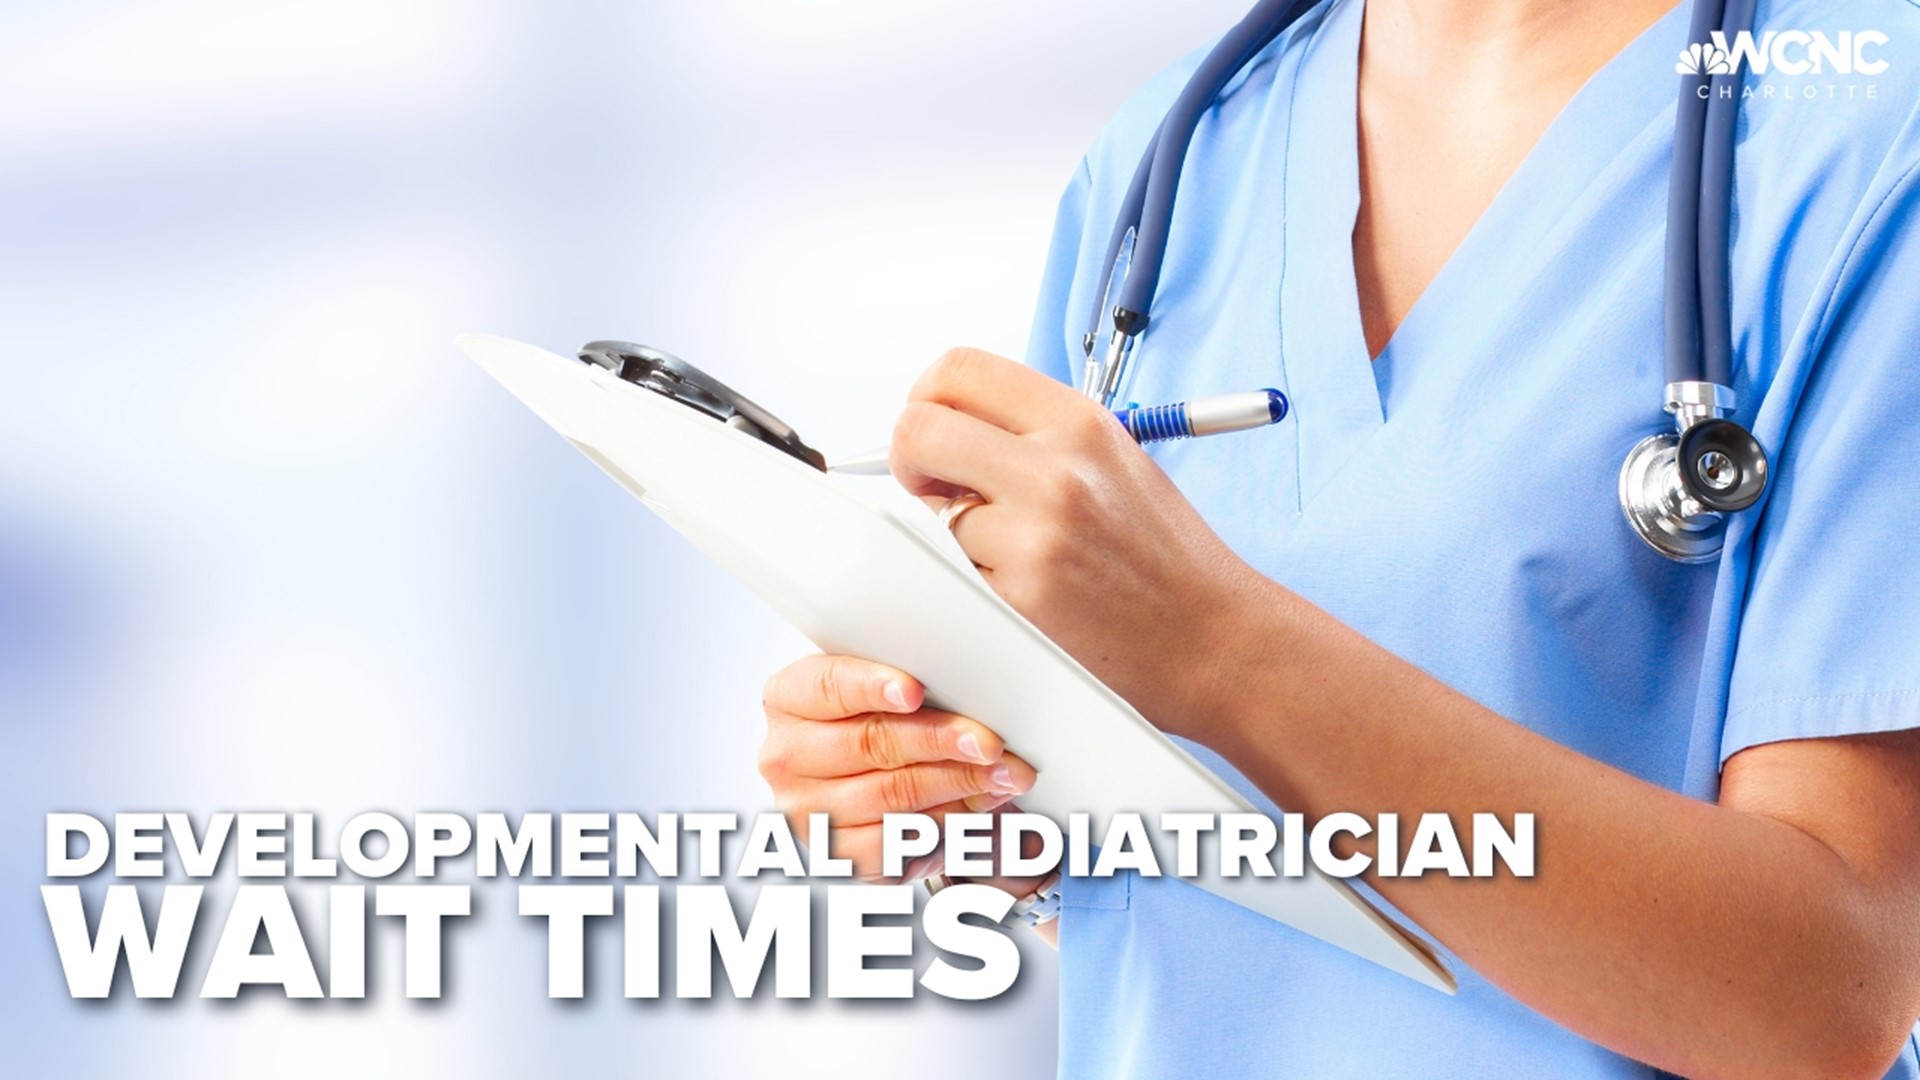 Experts say there are only 758 board-certified developmental-behavioral pediatricians in the U.S. for the 19 million kids with developmental or learning disorders.